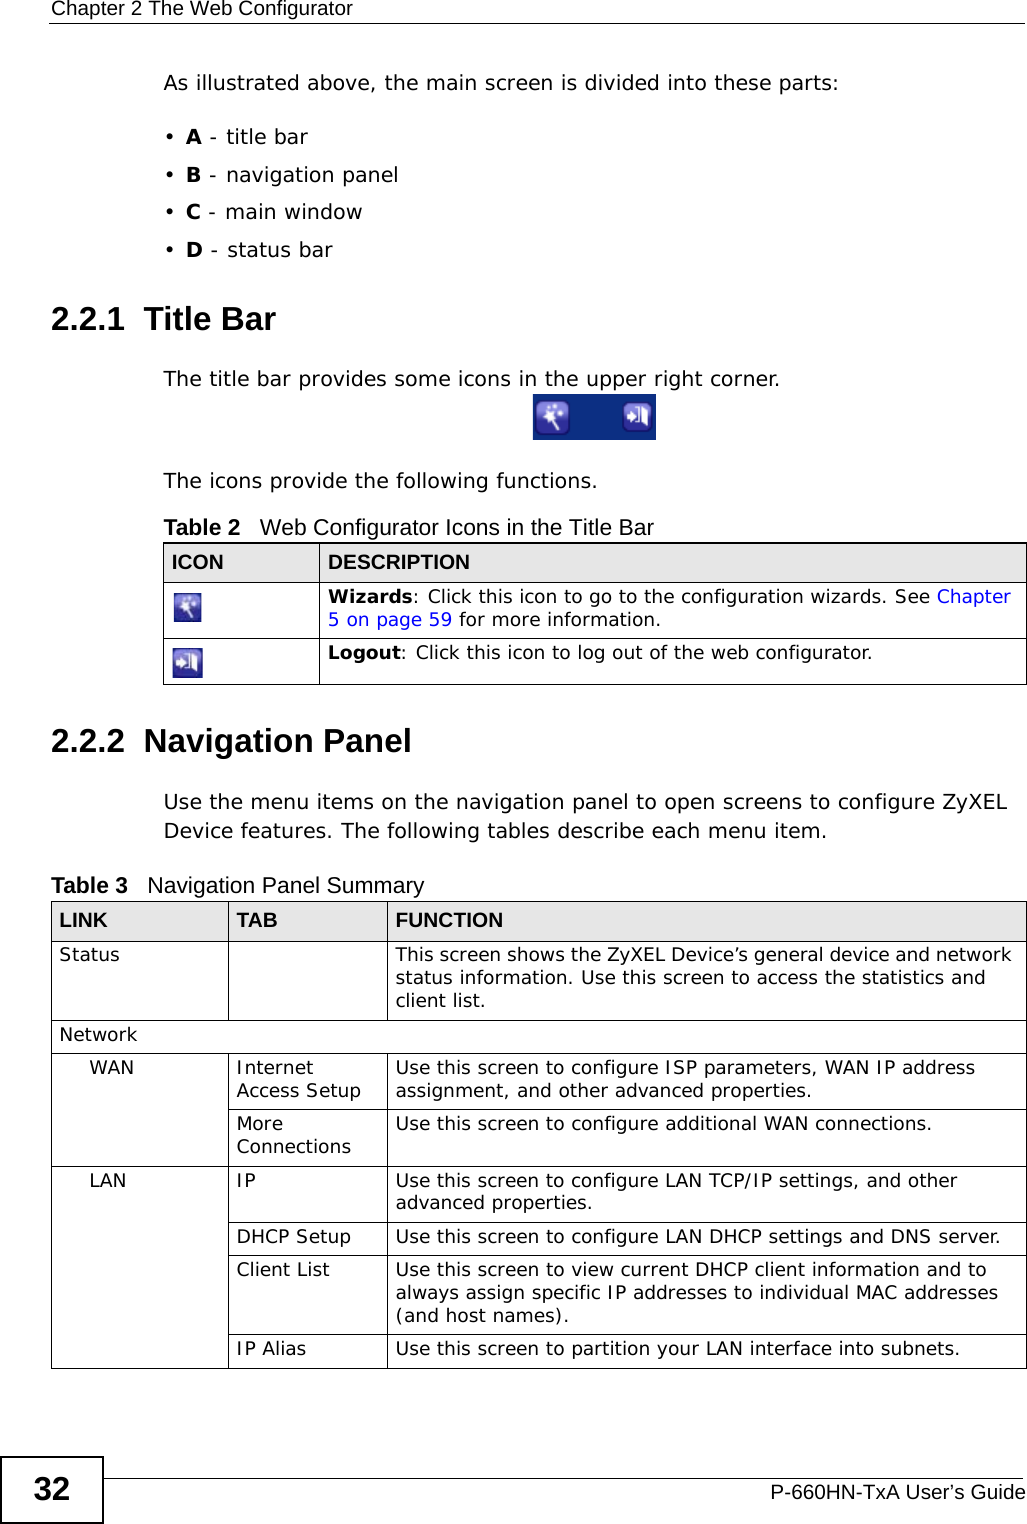 Chapter 2 The Web ConfiguratorP-660HN-TxA User’s Guide32As illustrated above, the main screen is divided into these parts:•A - title bar•B - navigation panel•C - main window•D - status bar2.2.1  Title BarThe title bar provides some icons in the upper right corner.The icons provide the following functions.2.2.2  Navigation PanelUse the menu items on the navigation panel to open screens to configure ZyXEL Device features. The following tables describe each menu item.Table 2   Web Configurator Icons in the Title BarICON  DESCRIPTIONWizards: Click this icon to go to the configuration wizards. See Chapter 5 on page 59 for more information.Logout: Click this icon to log out of the web configurator.Table 3   Navigation Panel SummaryLINK TAB FUNCTIONStatus This screen shows the ZyXEL Device’s general device and network status information. Use this screen to access the statistics and client list.NetworkWAN Internet Access Setup Use this screen to configure ISP parameters, WAN IP address assignment, and other advanced properties.More Connections Use this screen to configure additional WAN connections.LAN IP Use this screen to configure LAN TCP/IP settings, and other advanced properties.DHCP Setup Use this screen to configure LAN DHCP settings and DNS server.Client List Use this screen to view current DHCP client information and to always assign specific IP addresses to individual MAC addresses (and host names).IP Alias Use this screen to partition your LAN interface into subnets.